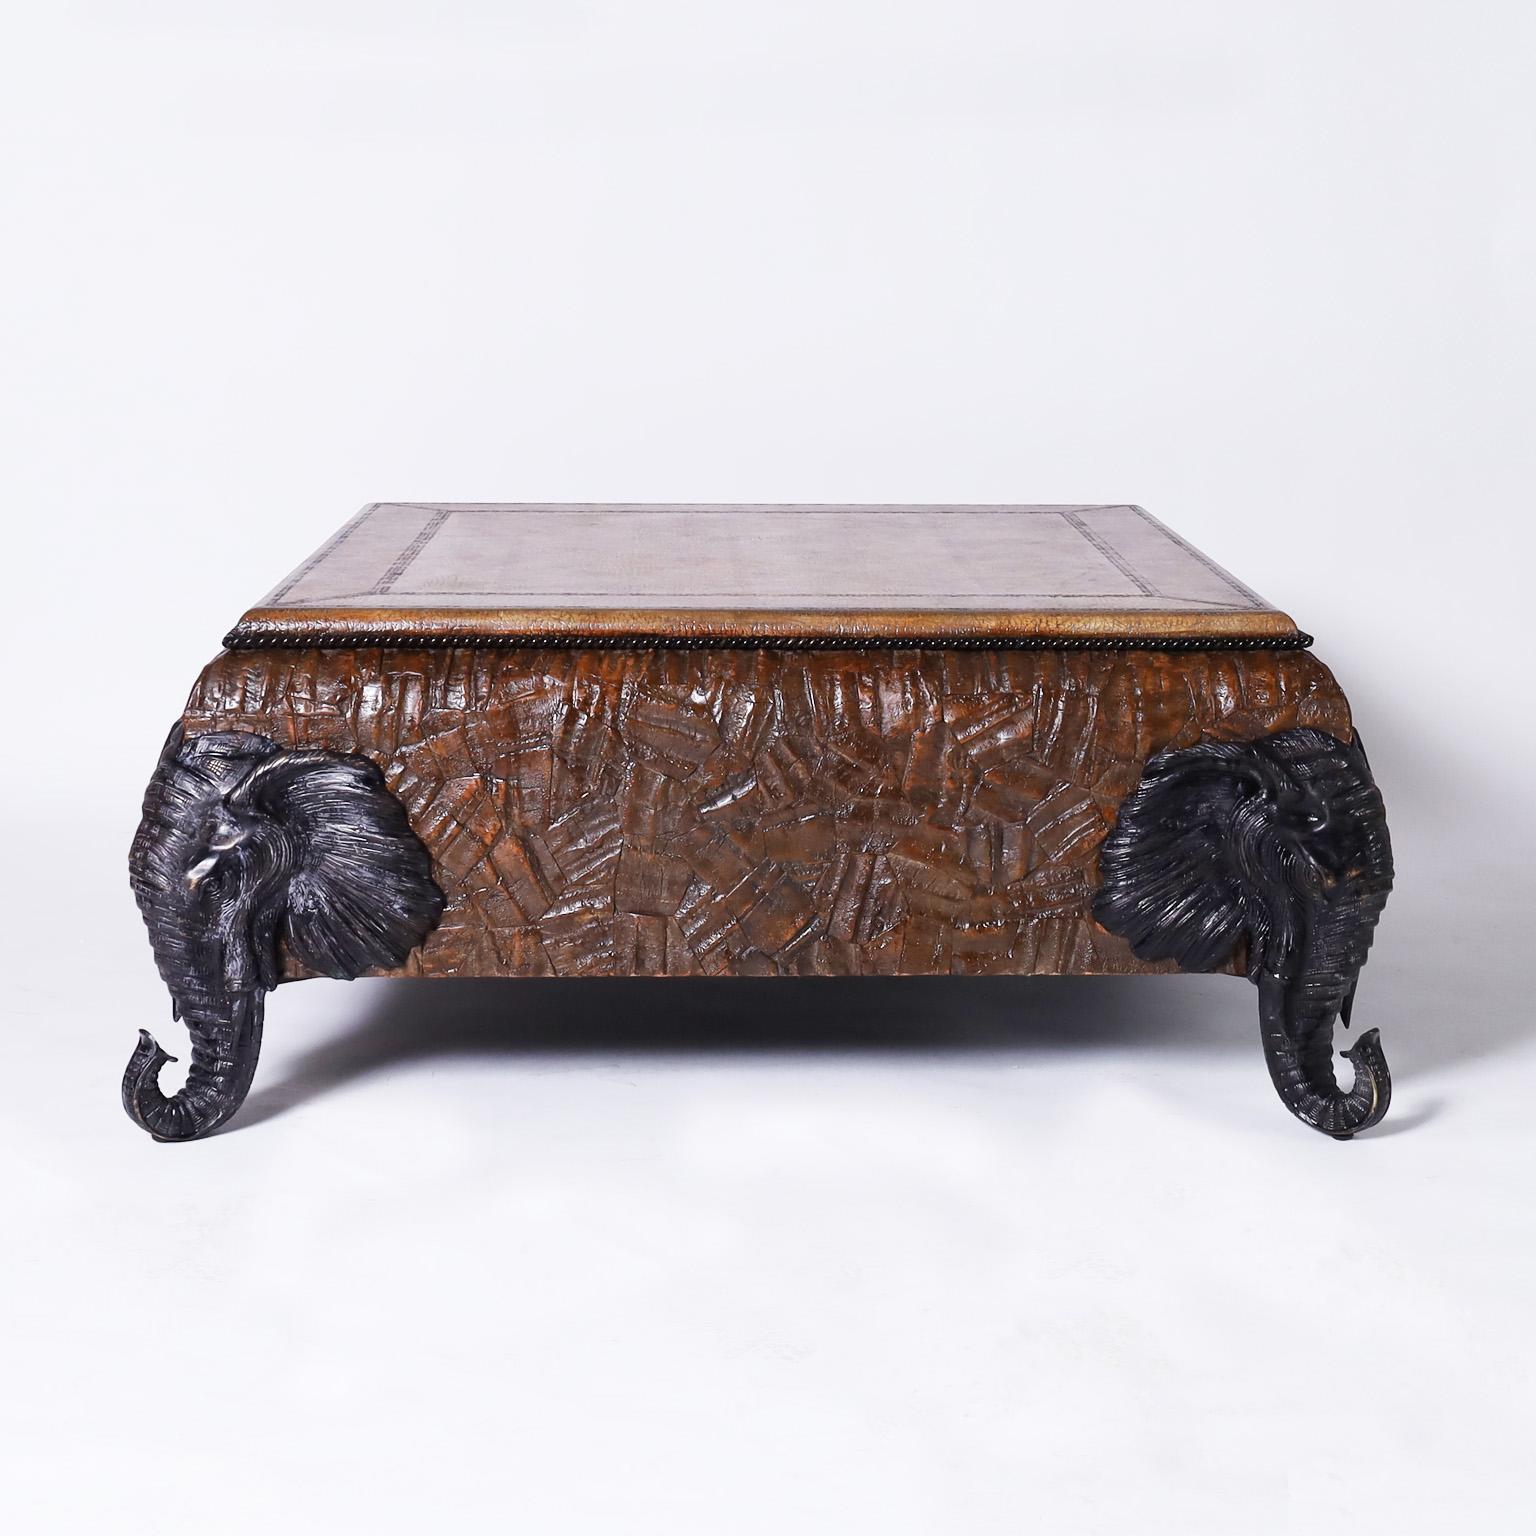 British Colonial style coffee table featuring a variegated tooled leather top over a case with a coconut shell mosaic and bronze elephant head legs. Signed Maitland-Smith on the bottom.